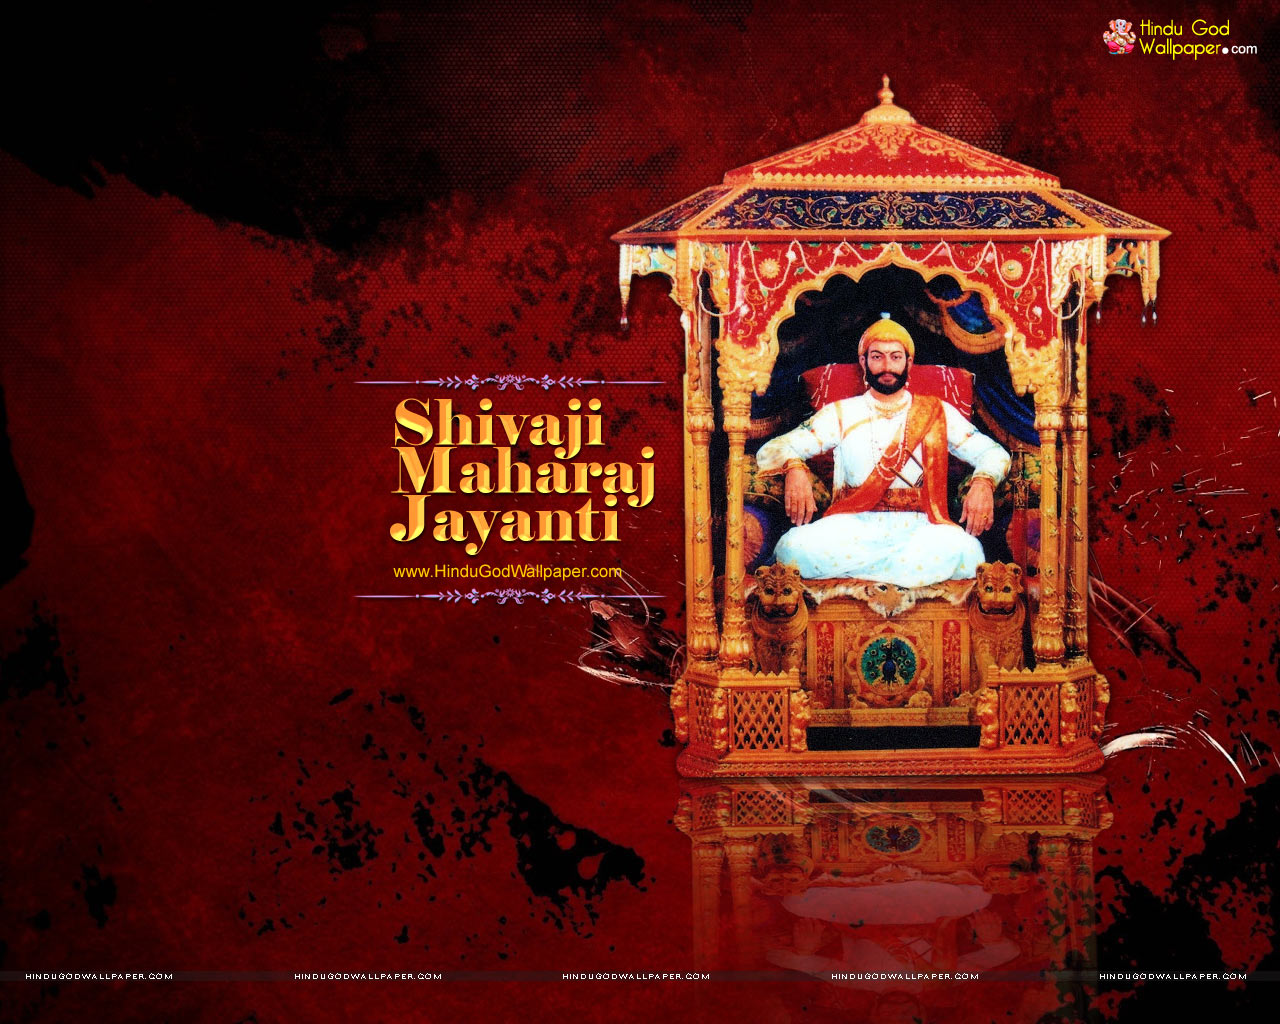 Shivaji Jayanti HD Wallpapers, Messages Images Download